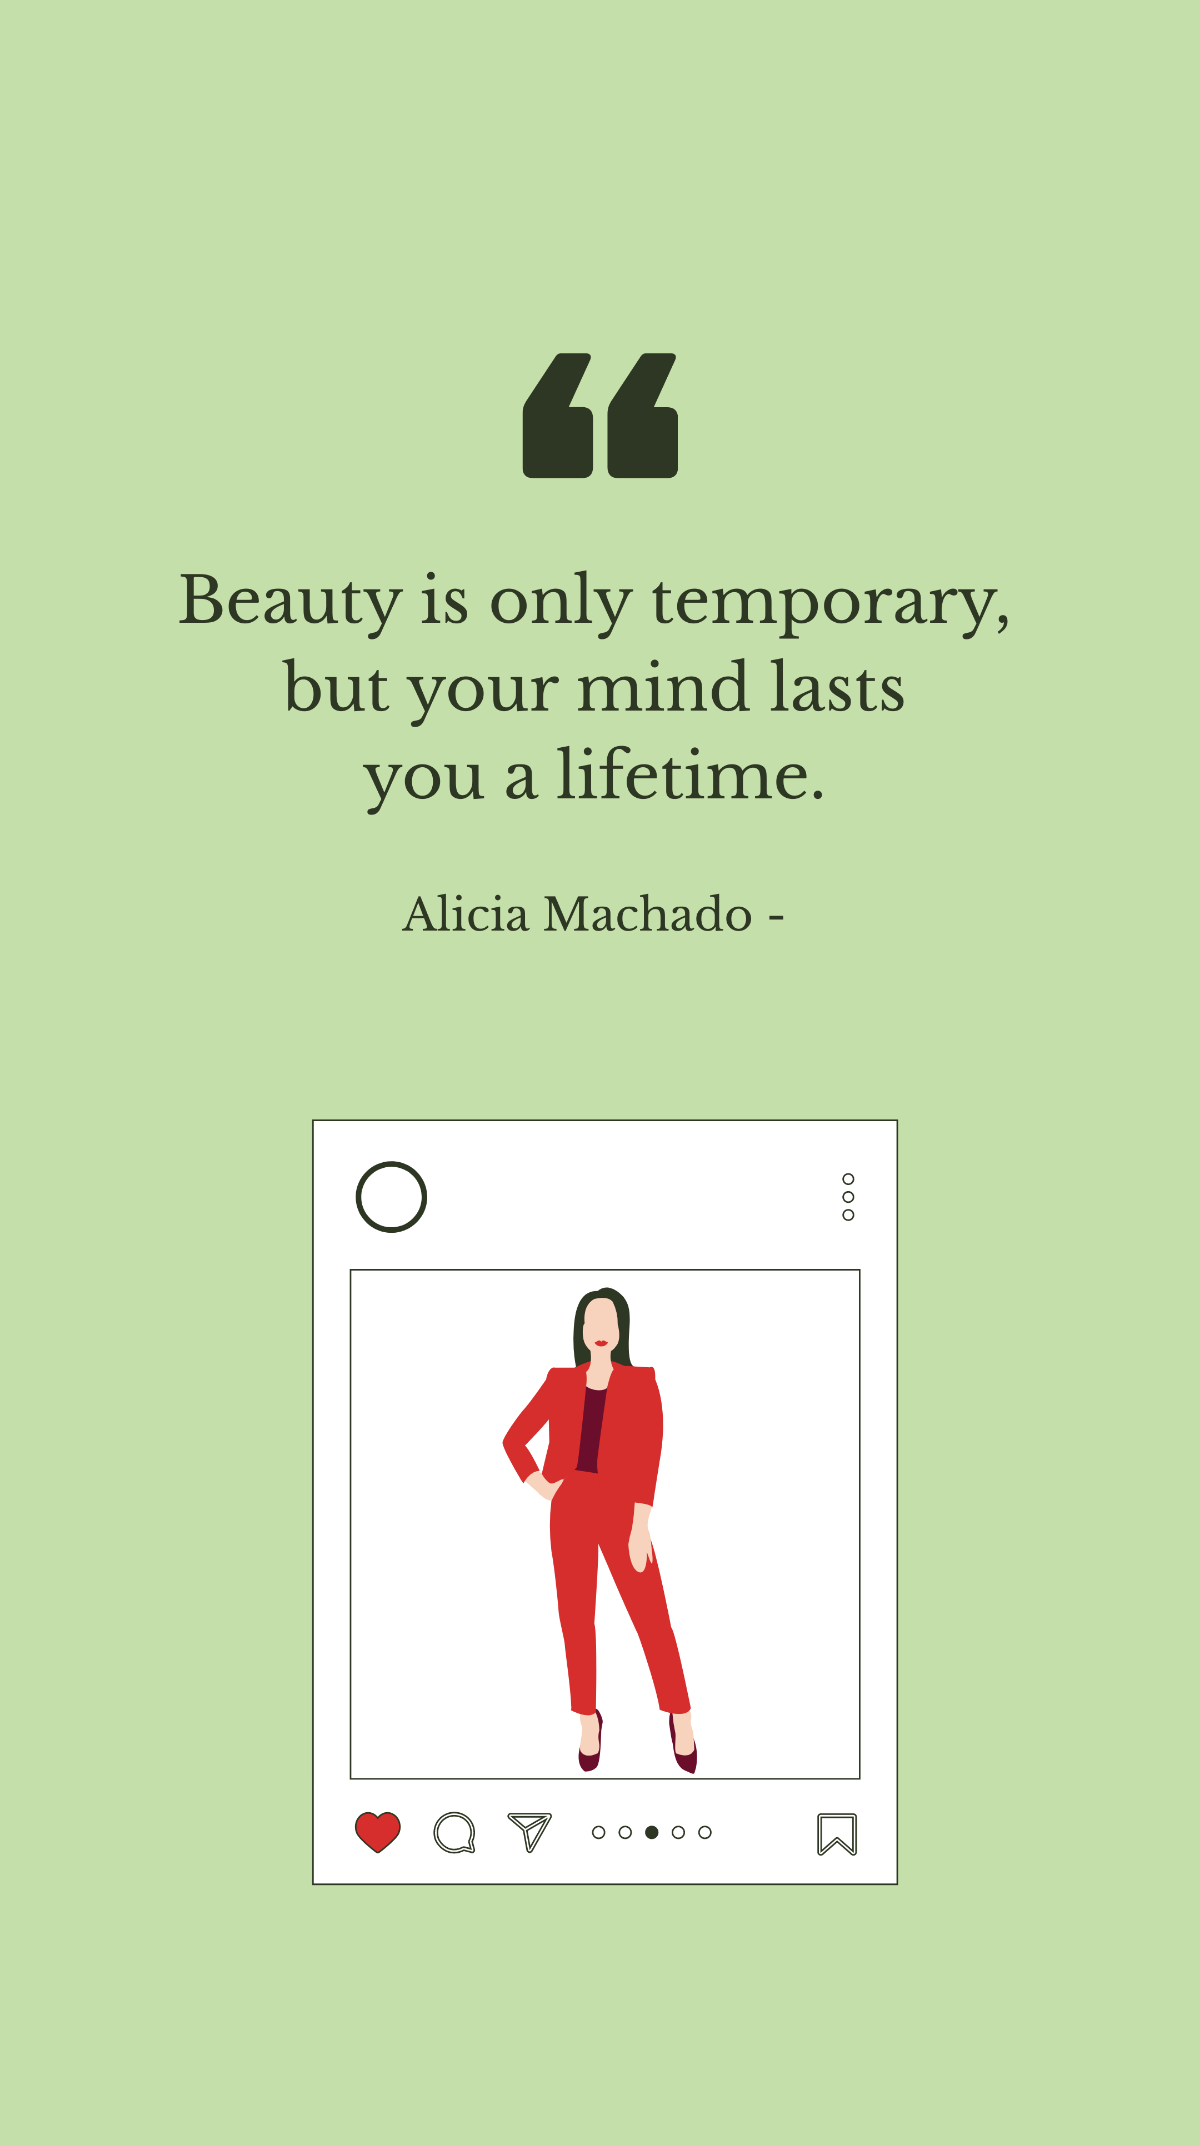 Free Alicia Machado - Beauty is only temporary, but your mind lasts you a lifetime. Template